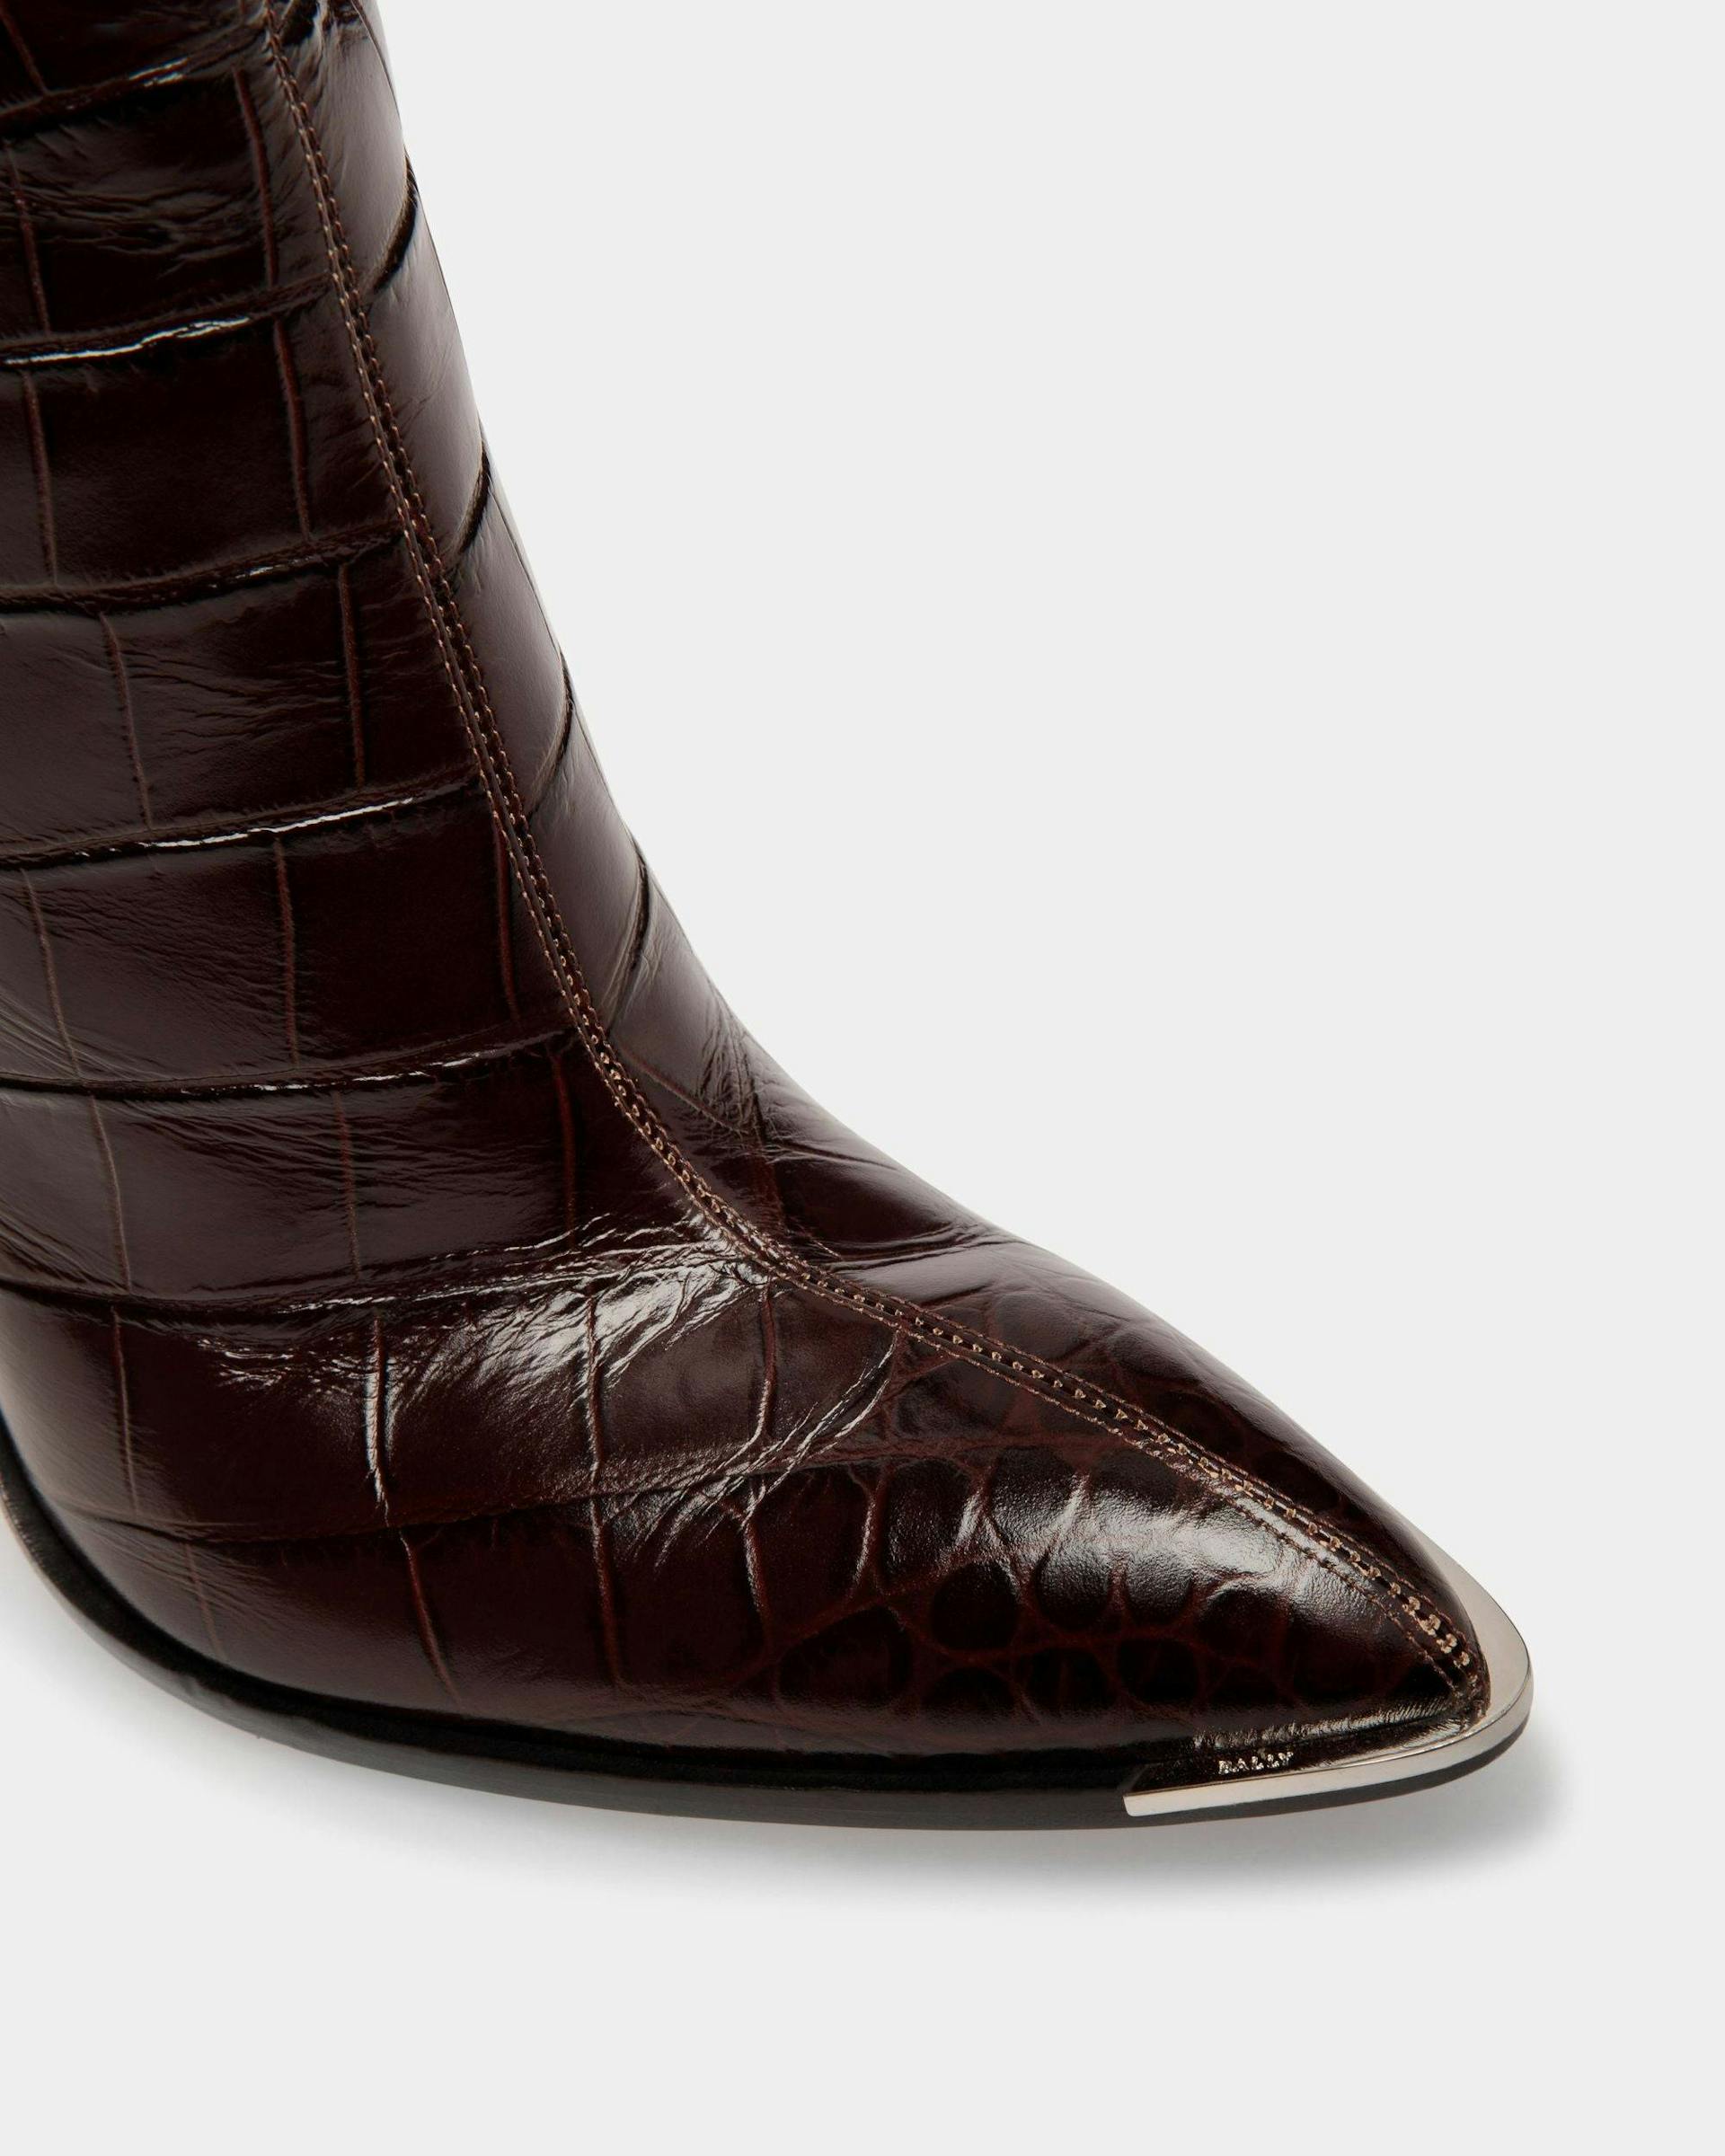 Hedy Long Boots In Burgundy Leather - Women's - Bally - 05